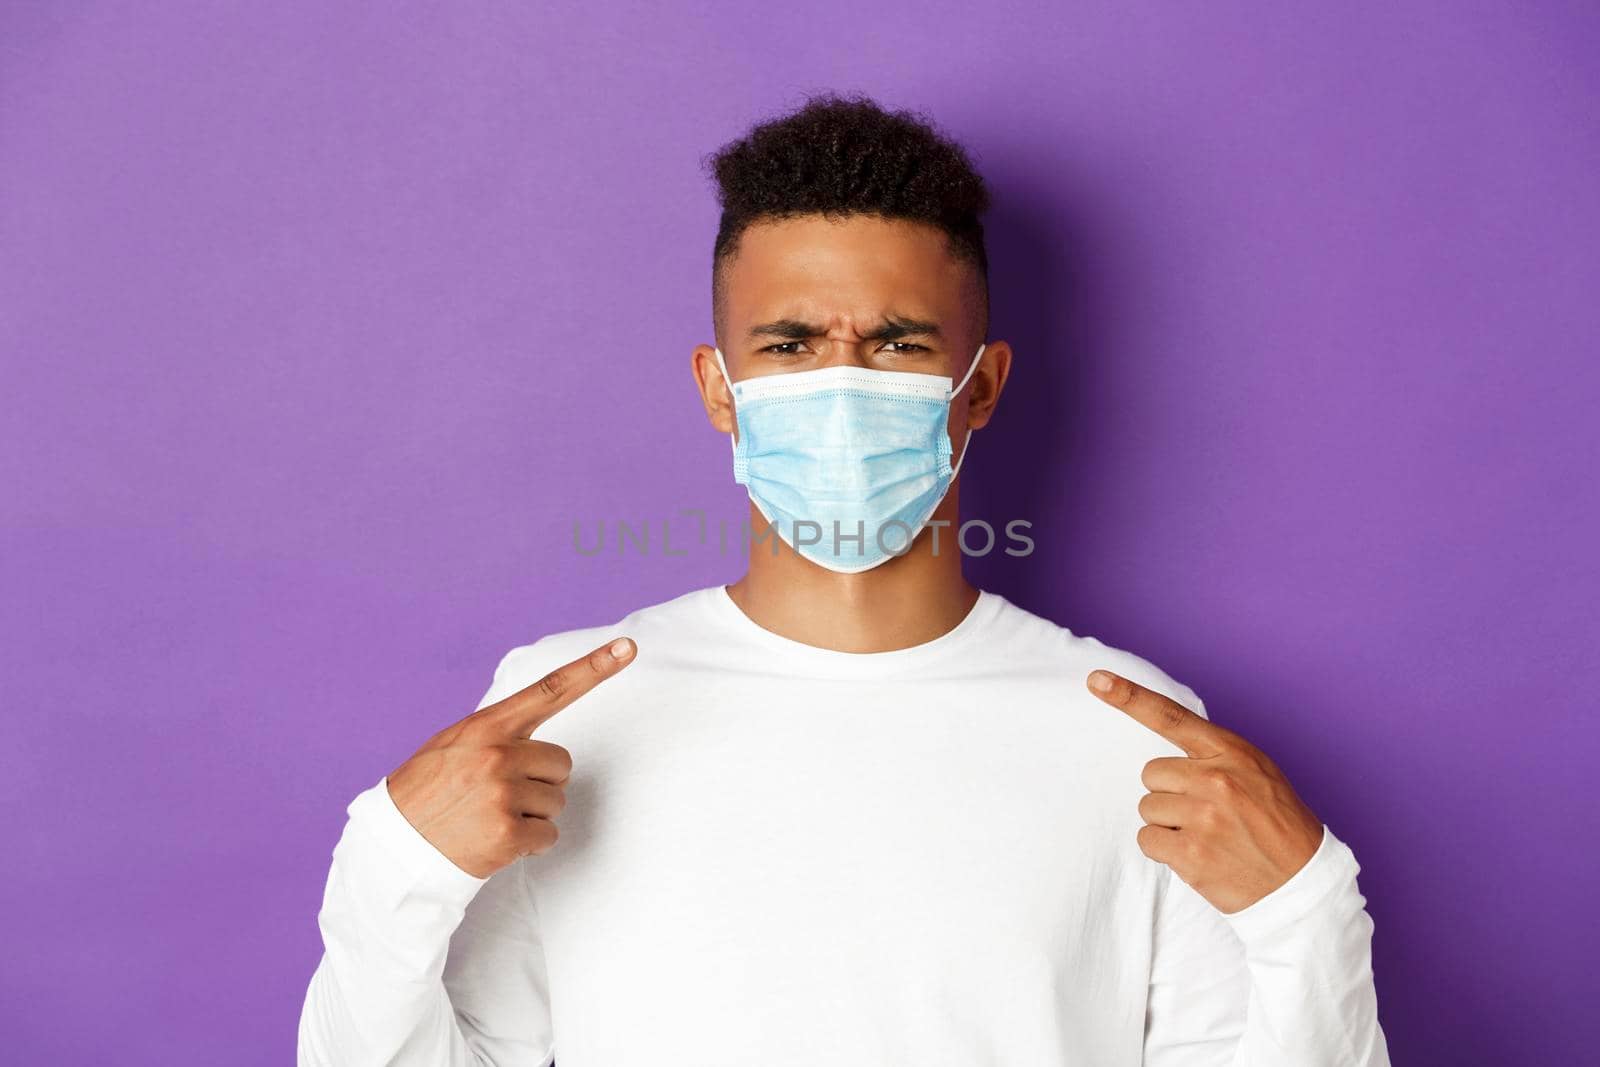 Concept of coronavirus, quarantine and social distancing. Close-up of annoyed african-american man pointing at medical mask, frowning bothered, complaining, standing over purple background.